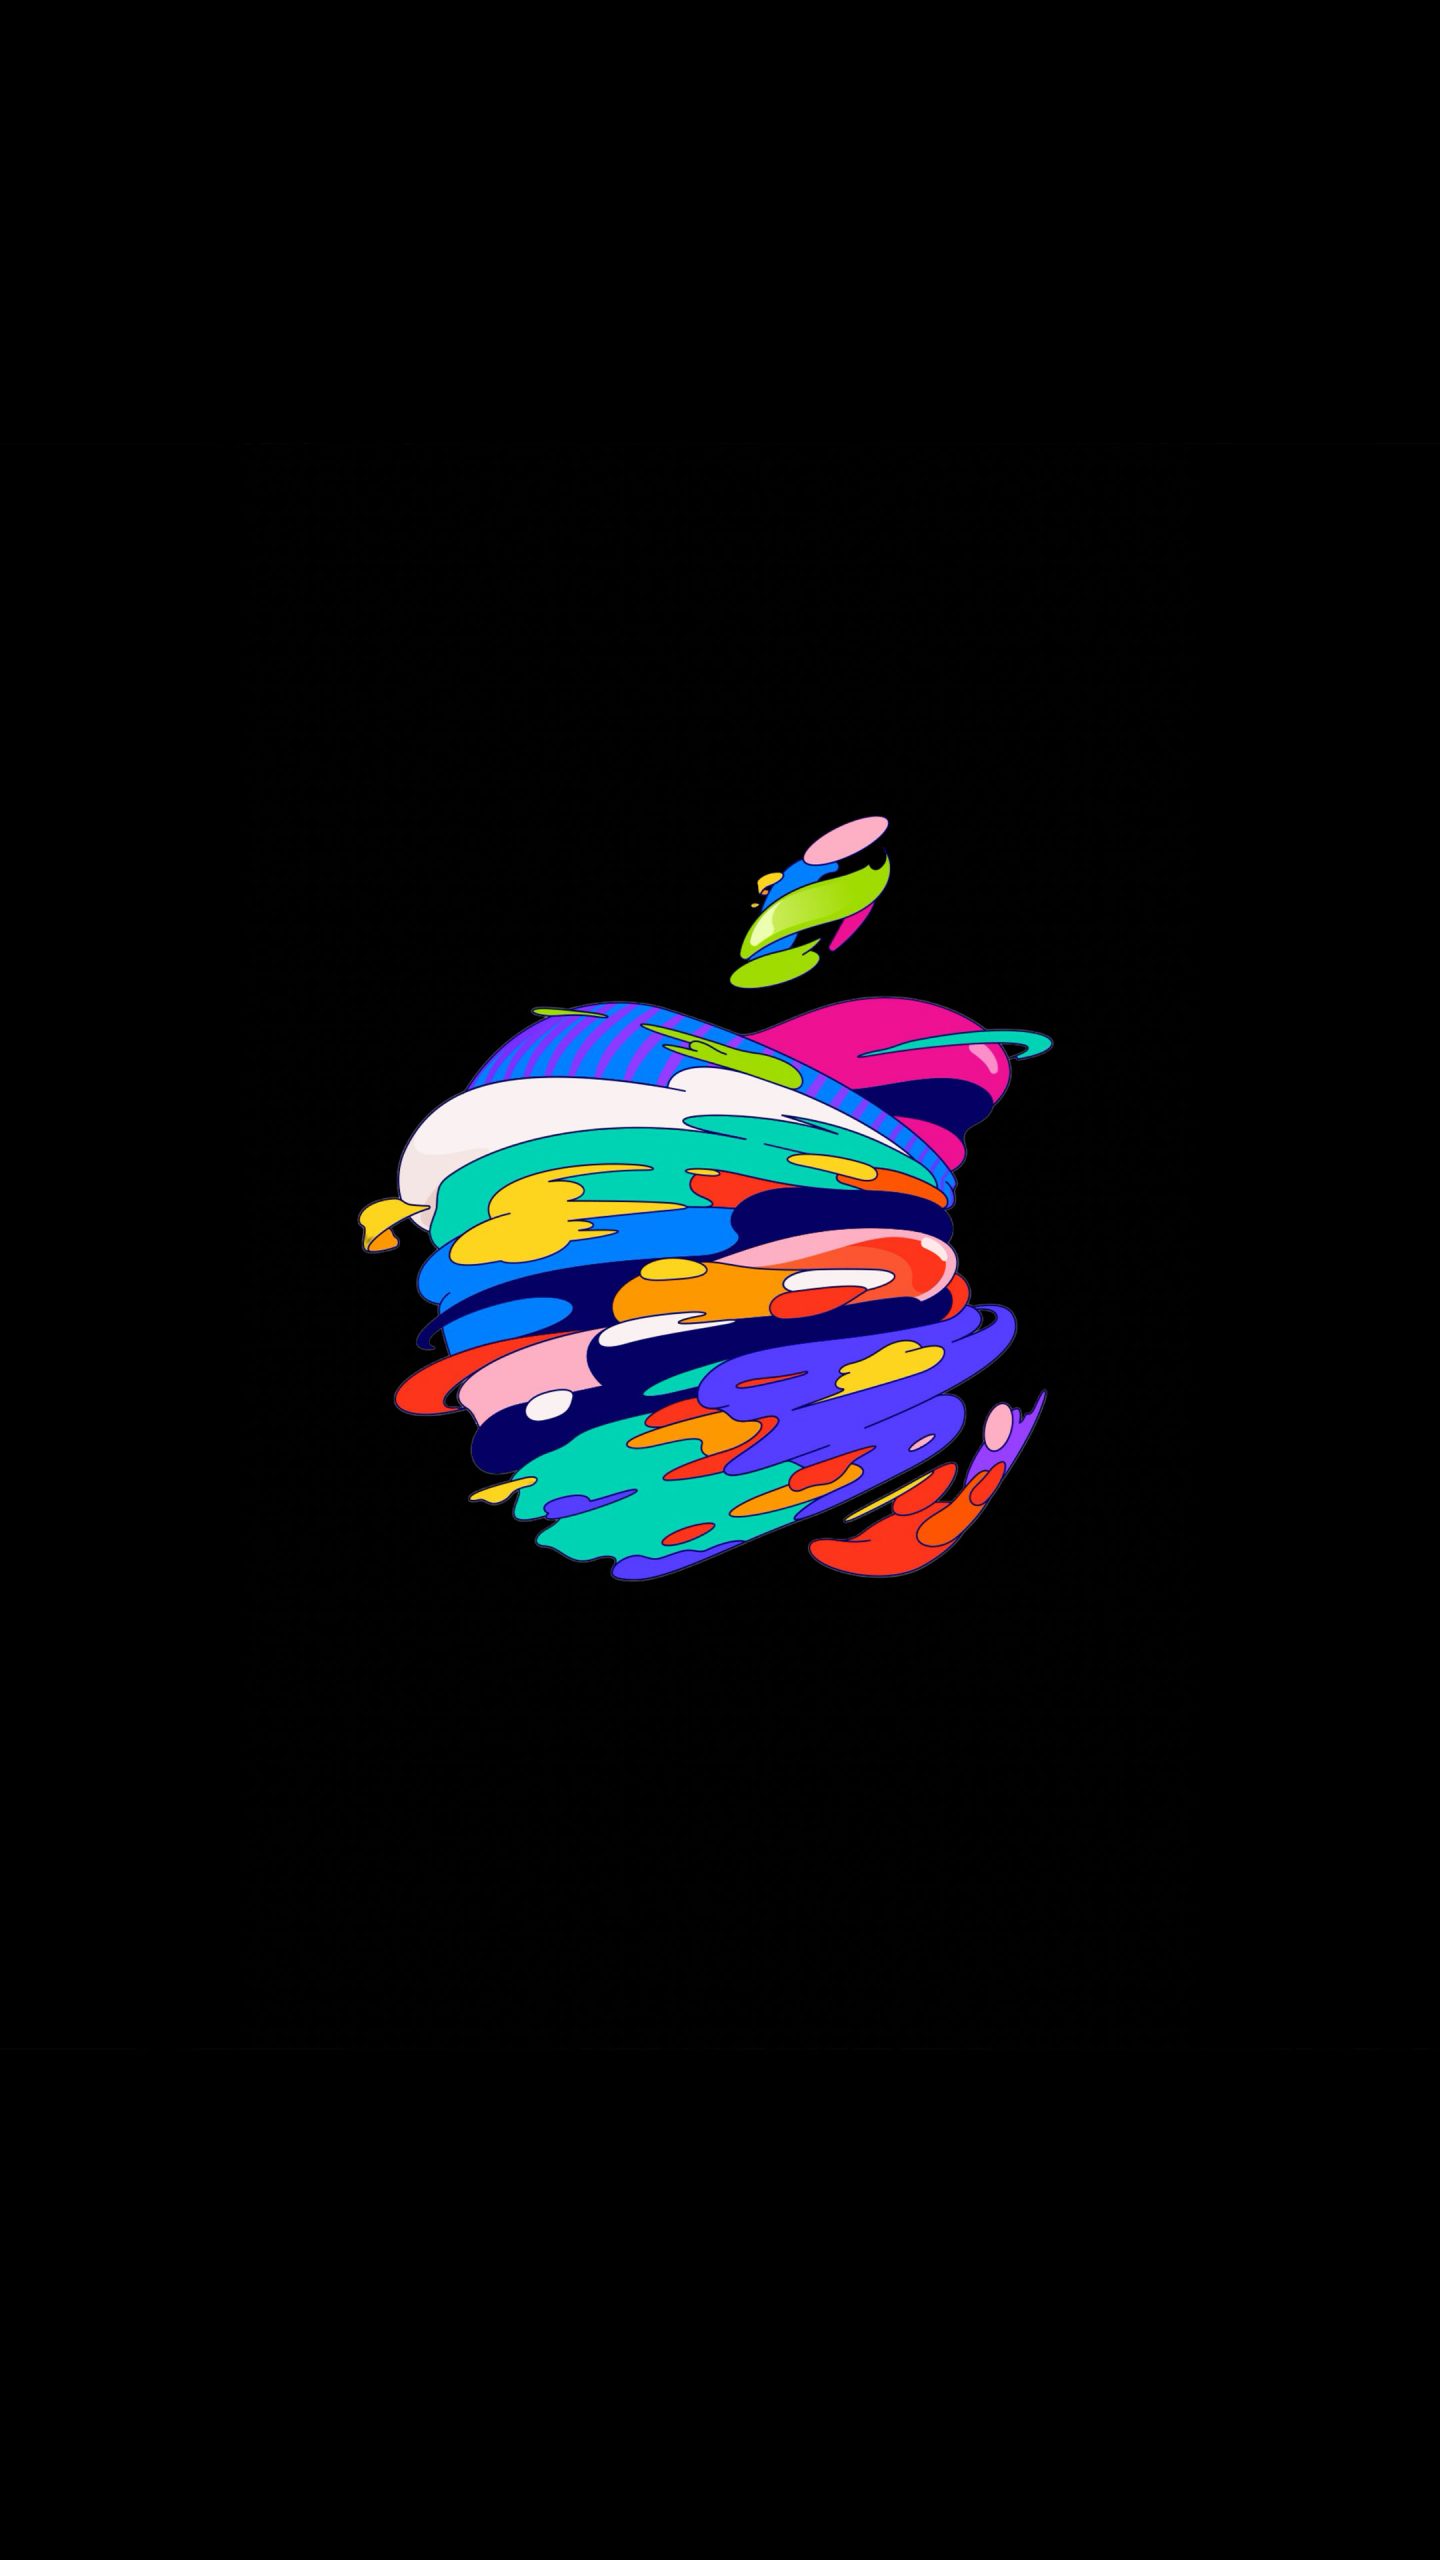 Apple 4K Ultra HD Wallpapers HD Apple 3840x2160 Backgrounds Free Images  Download